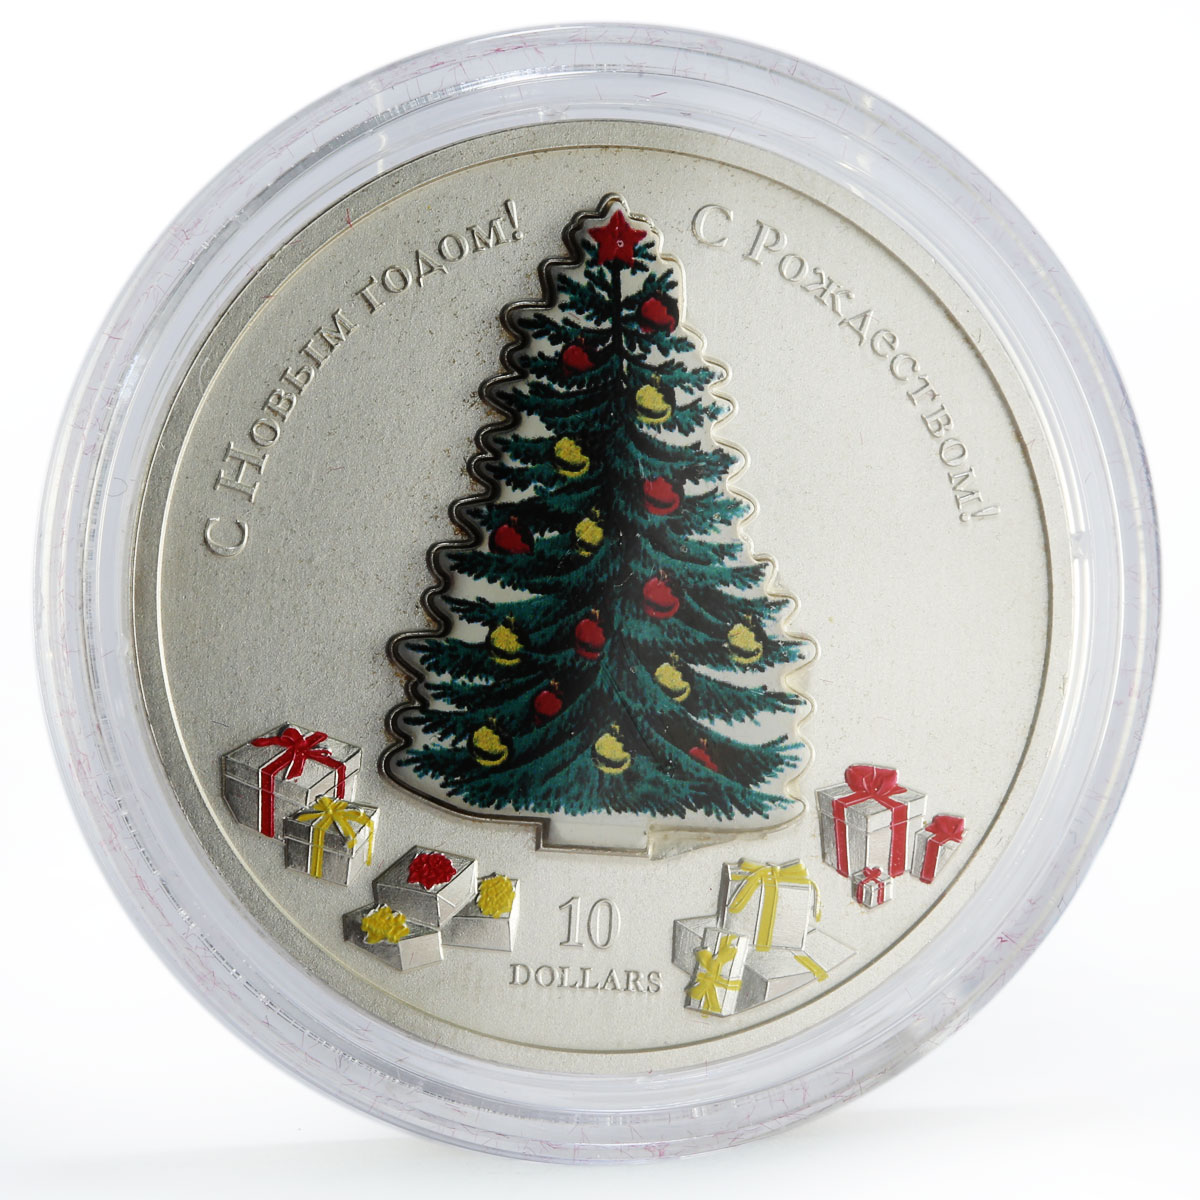 Nauru 10 dollars Happy New Year Christmas Eve colored silver coin 2007